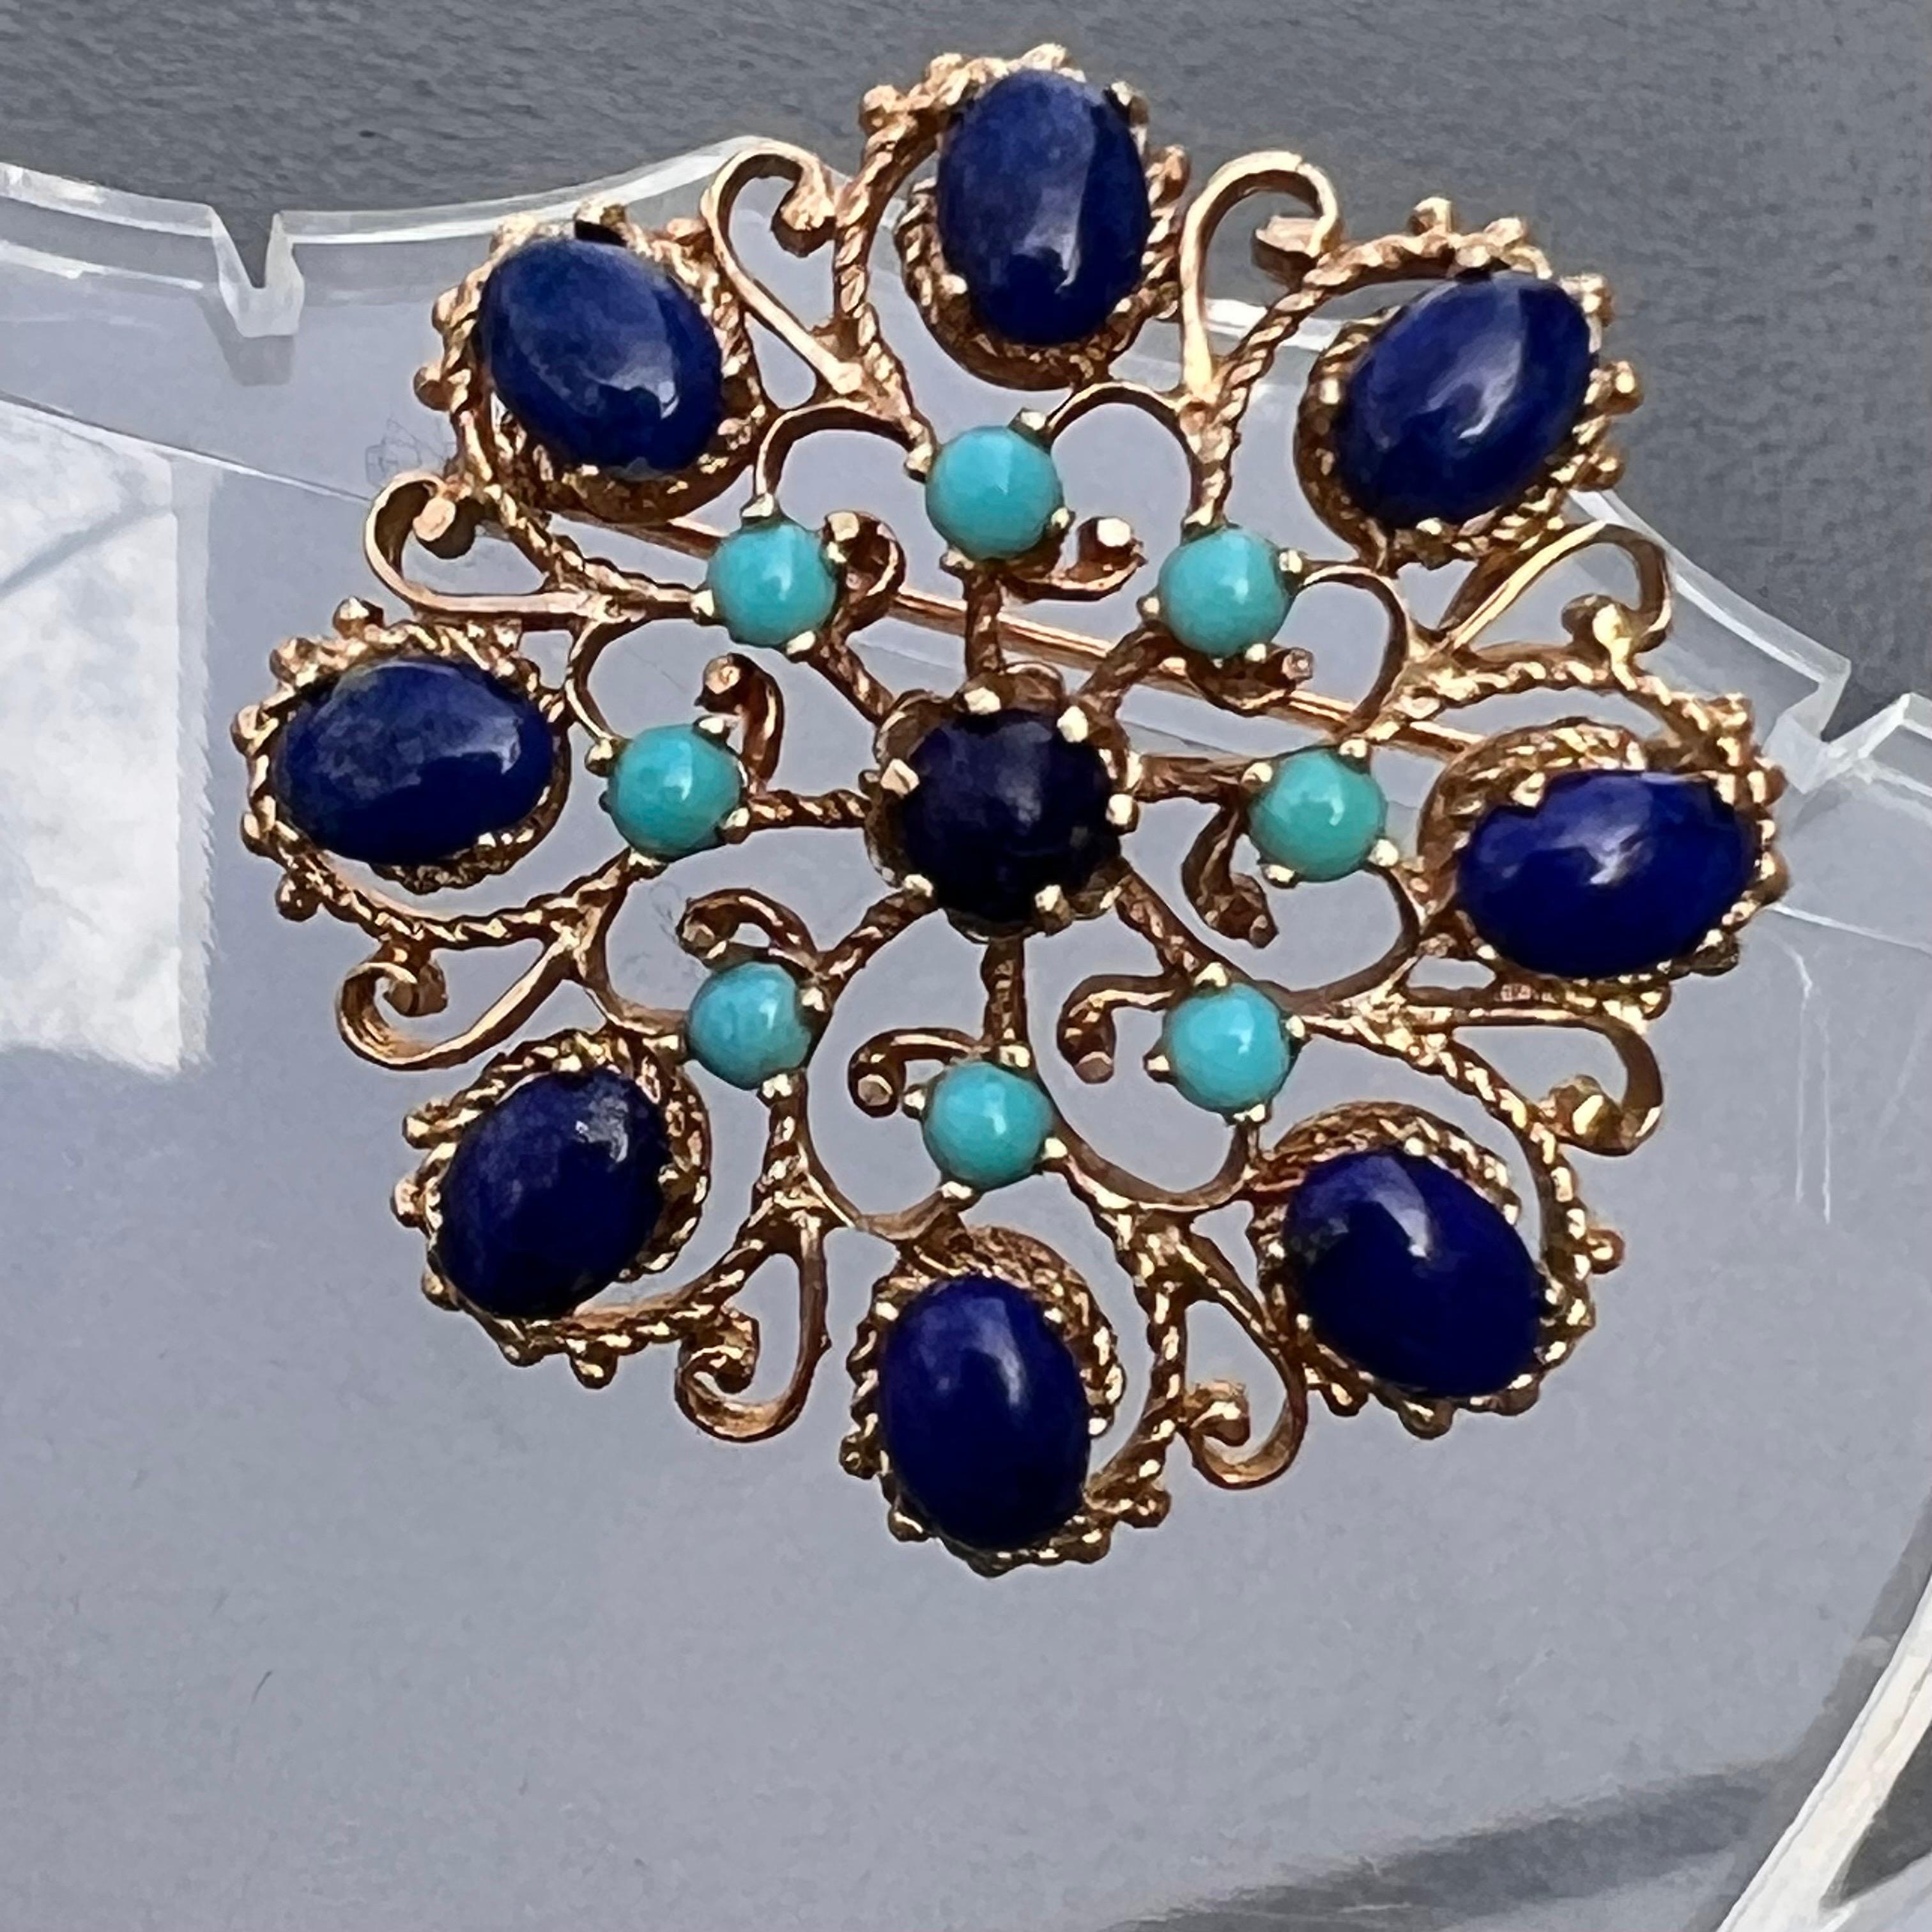 14 Karat Gold Turquoise and Lapis Victorian  Revival Brooch For Sale 2